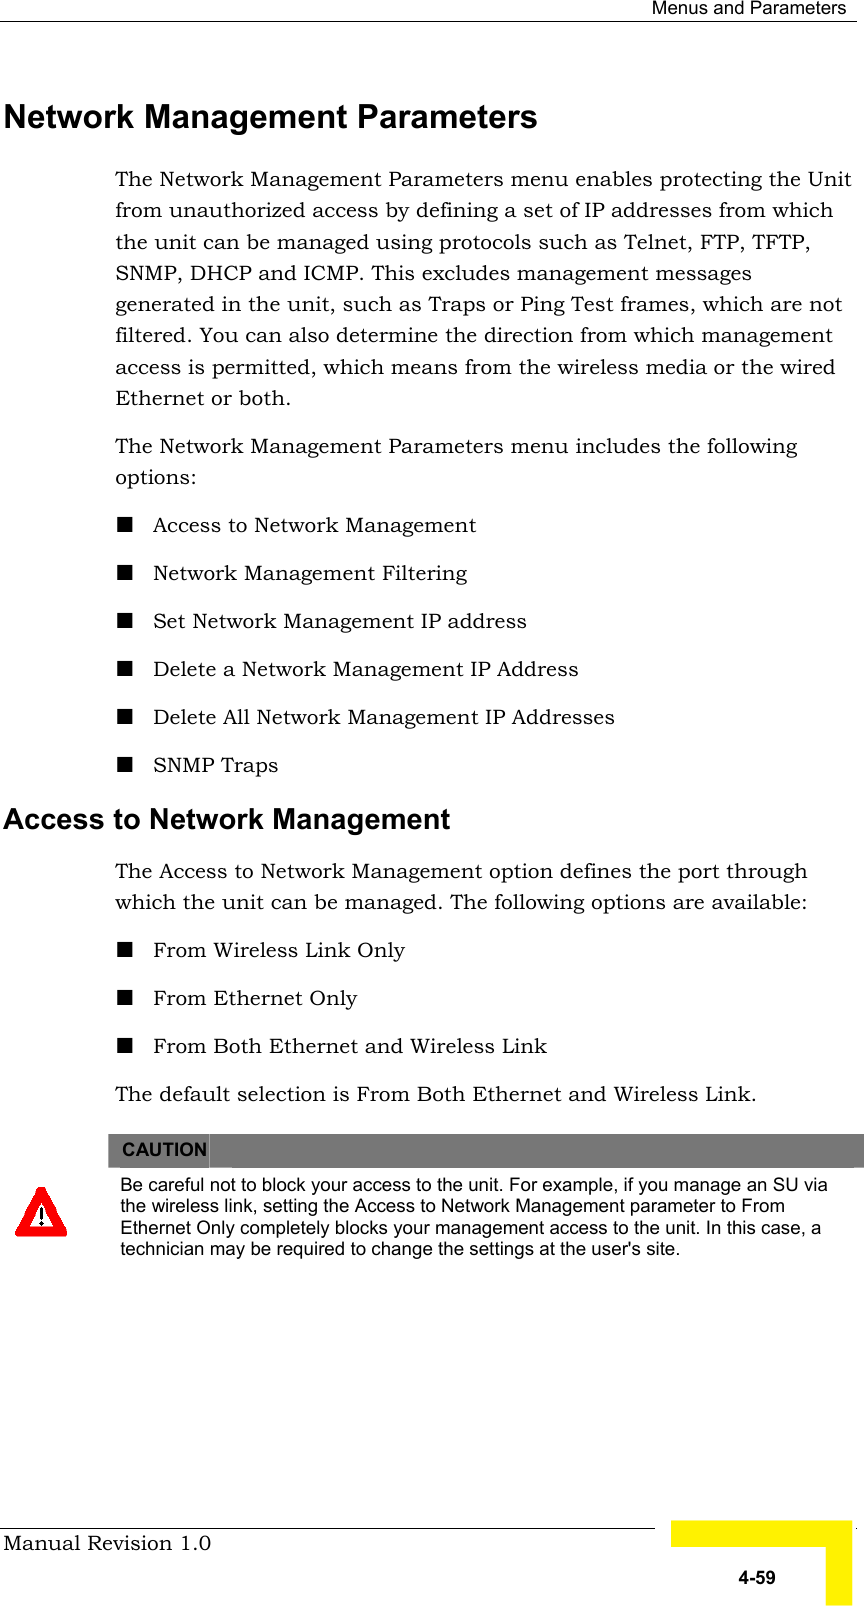  Menus and Parameters Manual Revision 1.0   4-59 Network Management Parameters  The Network Management Parameters menu enables protecting the Unit from unauthorized access by defining a set of IP addresses from which the unit can be managed using protocols such as Telnet, FTP, TFTP, SNMP, DHCP and ICMP. This excludes management messages generated in the unit, such as Traps or Ping Test frames, which are not filtered. You can also determine the direction from which management access is permitted, which means from the wireless media or the wired Ethernet or both. The Network Management Parameters menu includes the following options: ! Access to Network Management ! Network Management Filtering ! Set Network Management IP address ! Delete a Network Management IP Address ! Delete All Network Management IP Addresses ! SNMP Traps Access to Network Management  The Access to Network Management option defines the port through which the unit can be managed. The following options are available: ! From Wireless Link Only ! From Ethernet Only ! From Both Ethernet and Wireless Link The default selection is From Both Ethernet and Wireless Link.    CAUTION    Be careful not to block your access to the unit. For example, if you manage an SU via the wireless link, setting the Access to Network Management parameter to From Ethernet Only completely blocks your management access to the unit. In this case, a technician may be required to change the settings at the user&apos;s site. 